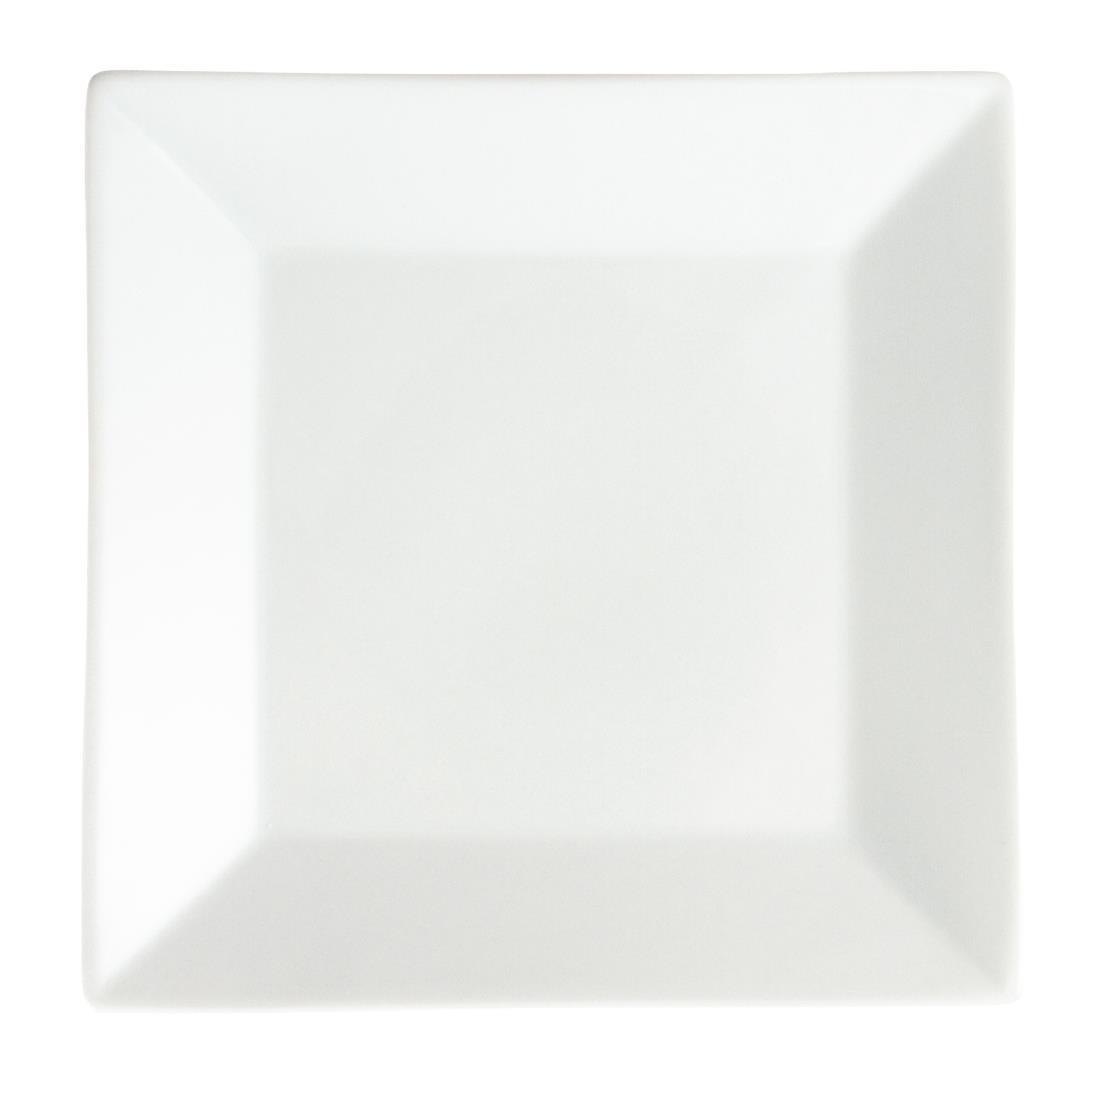 Olympia Whiteware Square Plates Wide Rim 250mm (Pack of 6) - C360  - 3